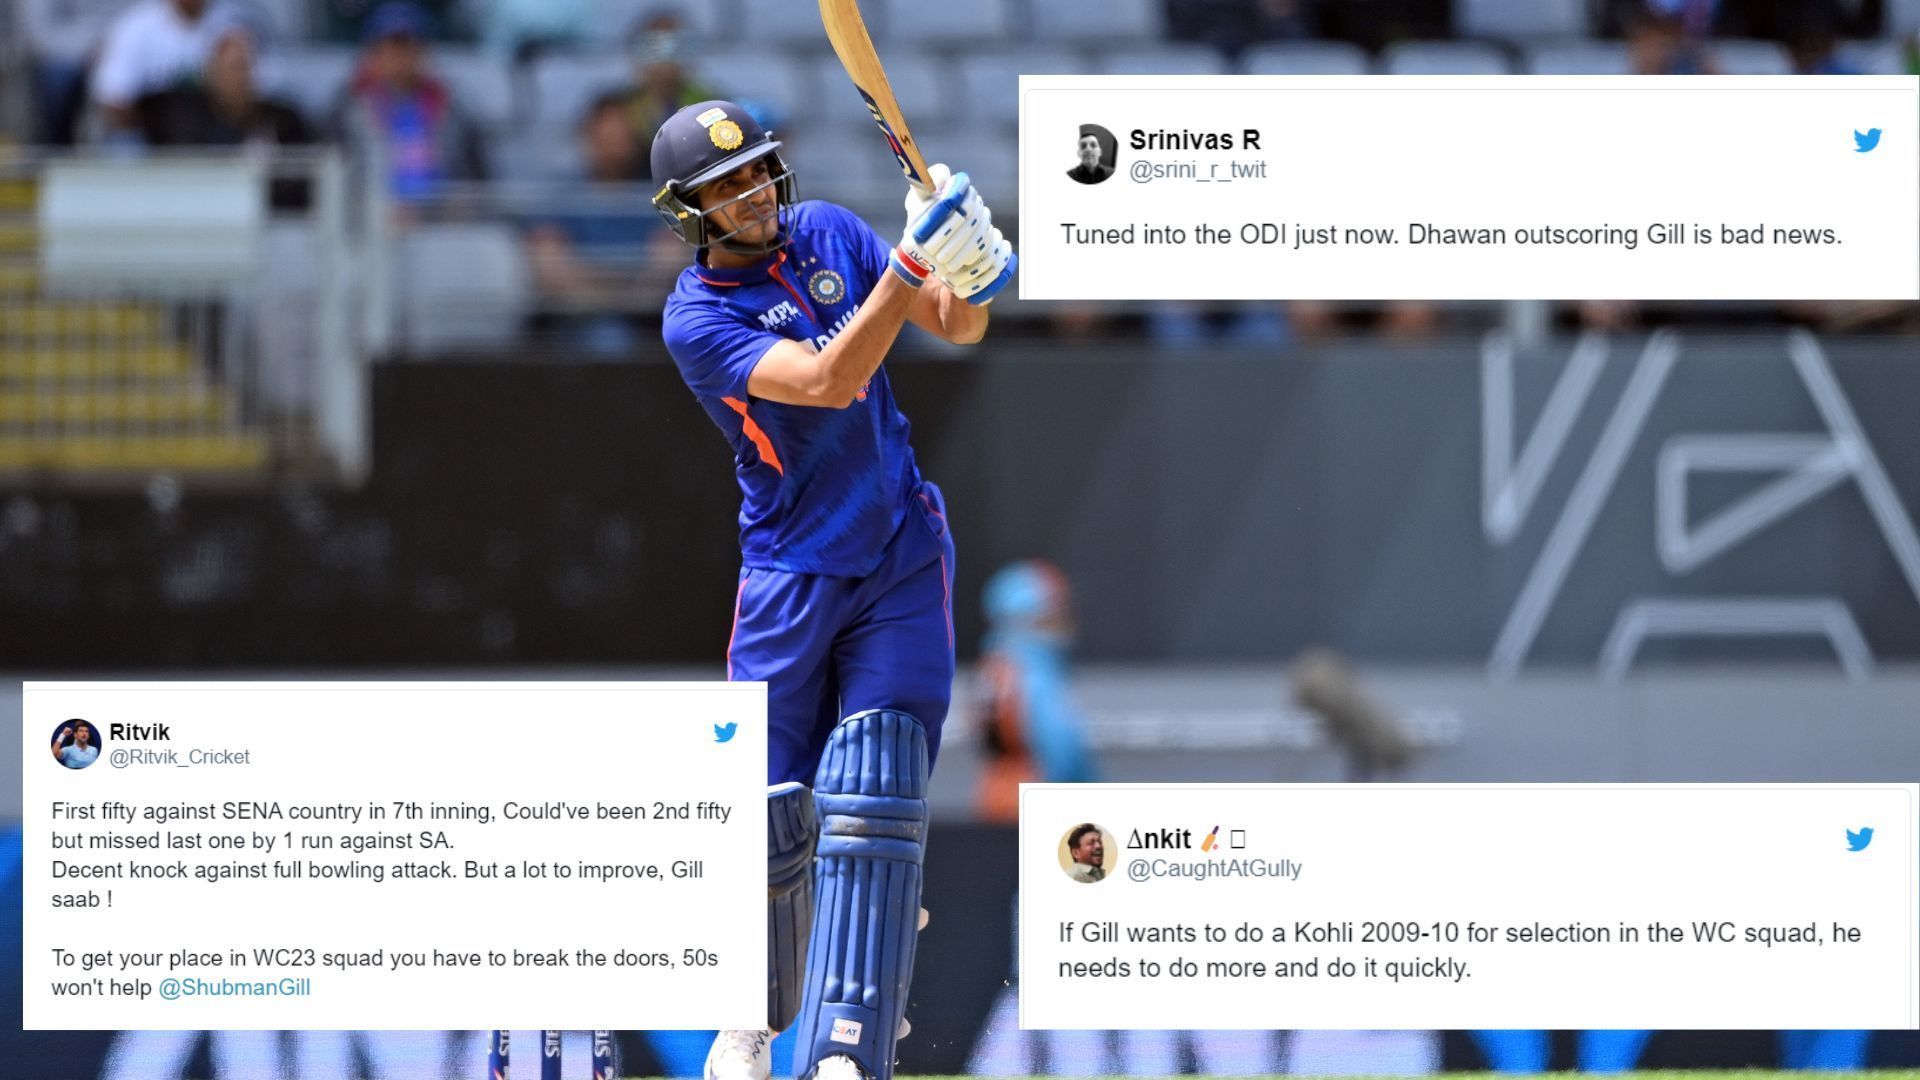 &quot;To get your place in WC23 squad you have to break the doors&quot; - Twitterati miffed with Shubman Gill for not converting his fifty in the first ODI against New Zealand